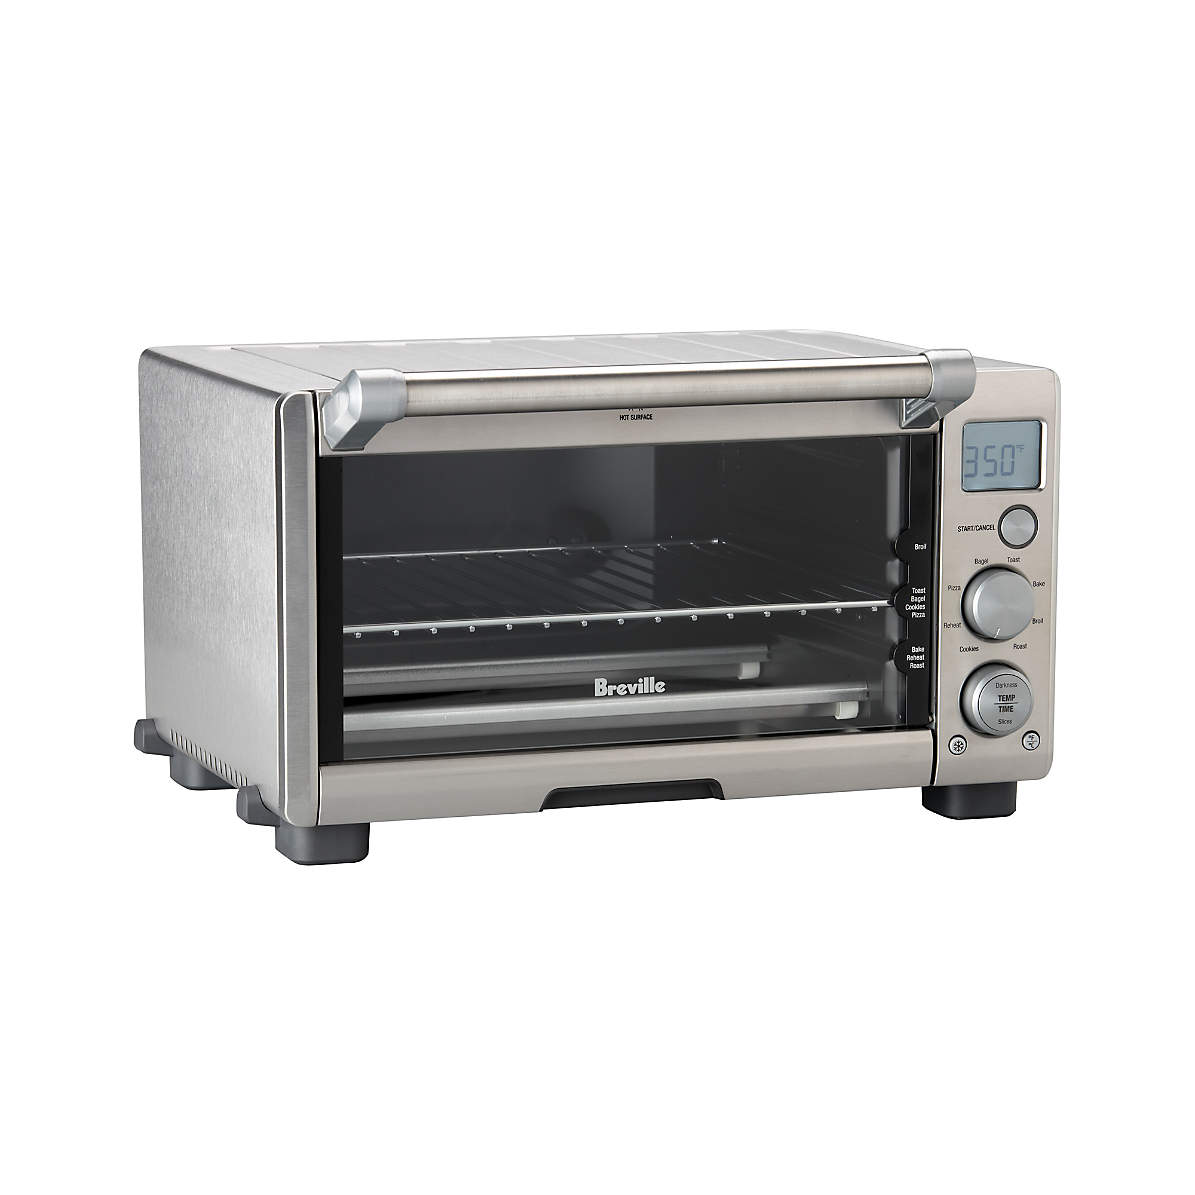 Breville BOV650XL 1800 W Stainless Steel Compact Smart Oven for sale online